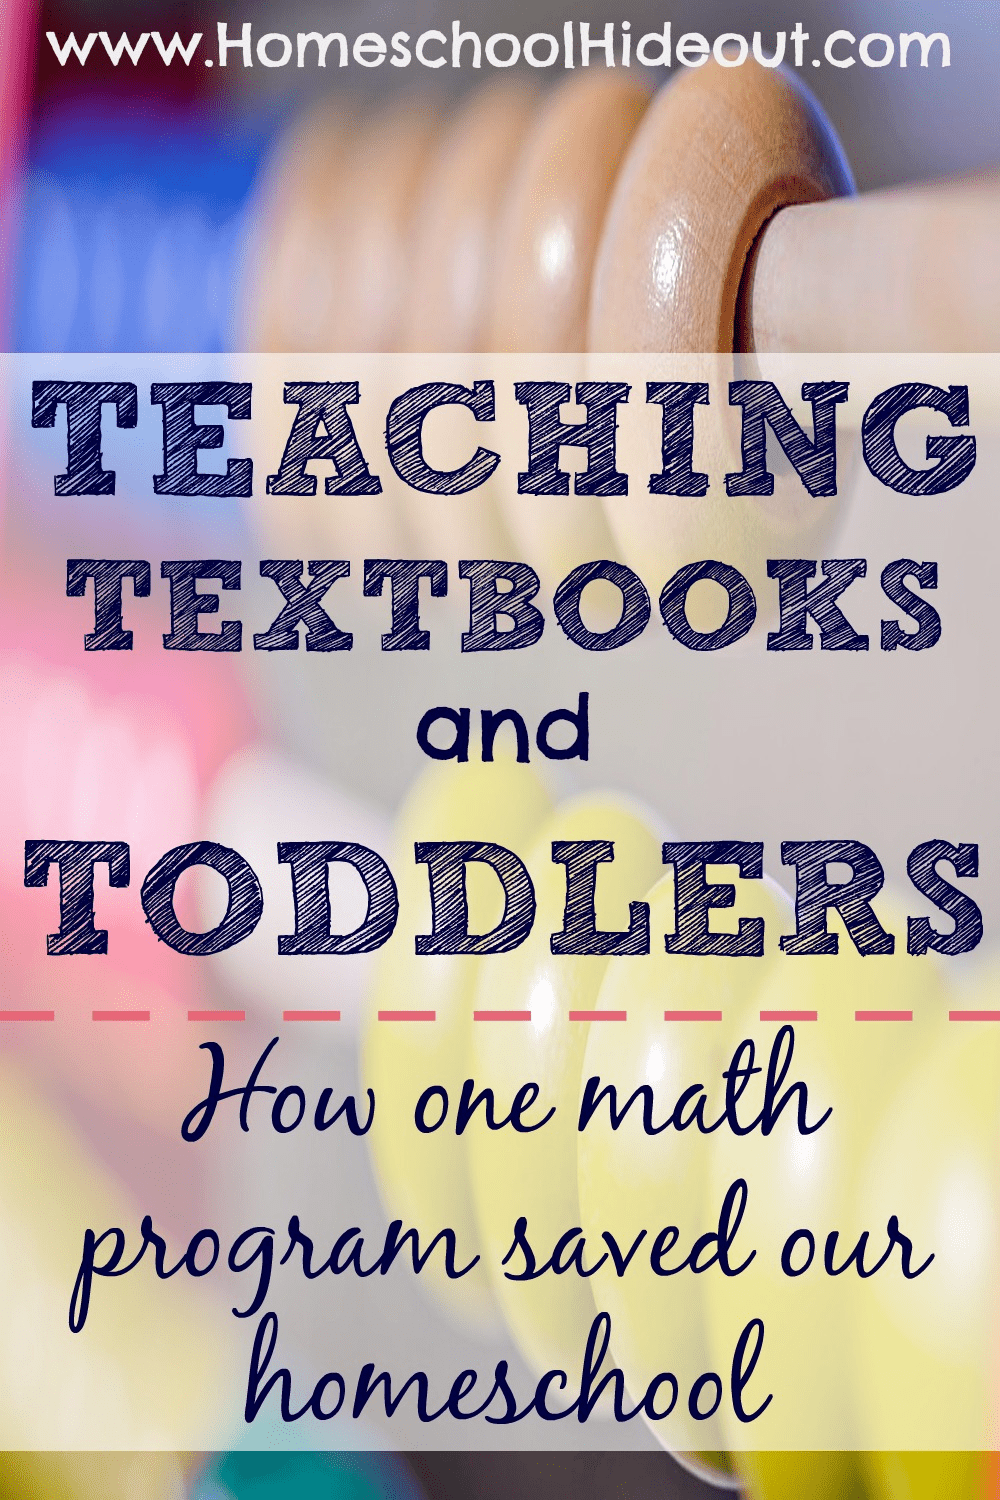 Ever wonder how homeschoolers get anything done with a toddler around? Teaching Textbooks is the secret! Gotta admit-it changed our entire school day once we started using it!